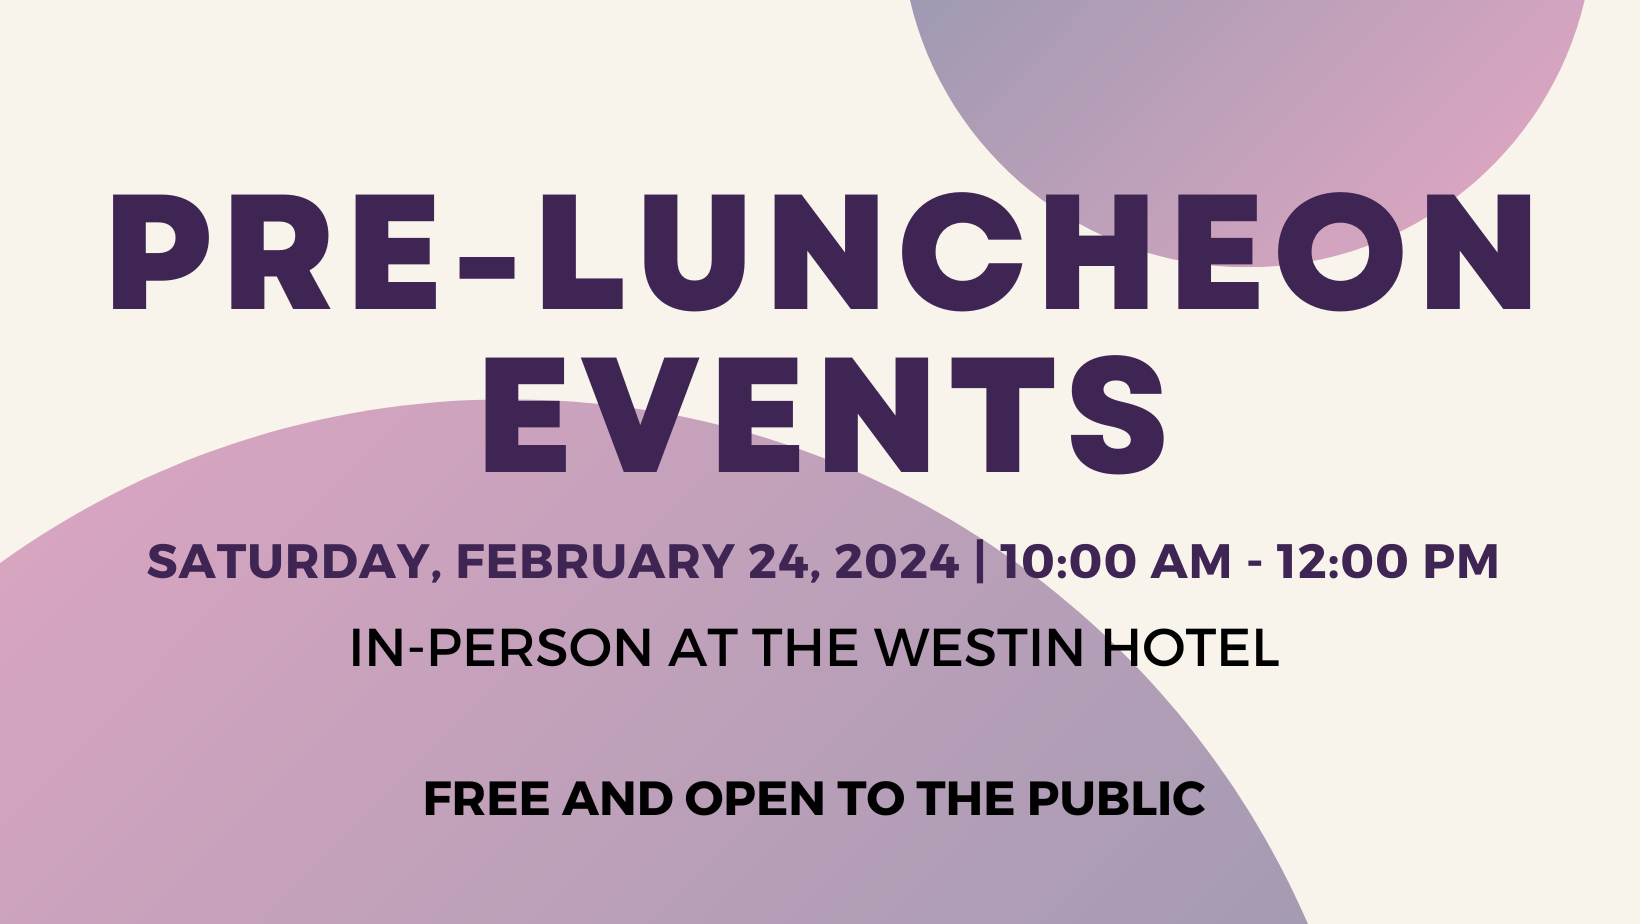 Pre-Luncheon Events! Saturday, February 24, 2024 | 10:00 am - 12:00 pm. In-person at the Westin Hotel. Free and open to the public